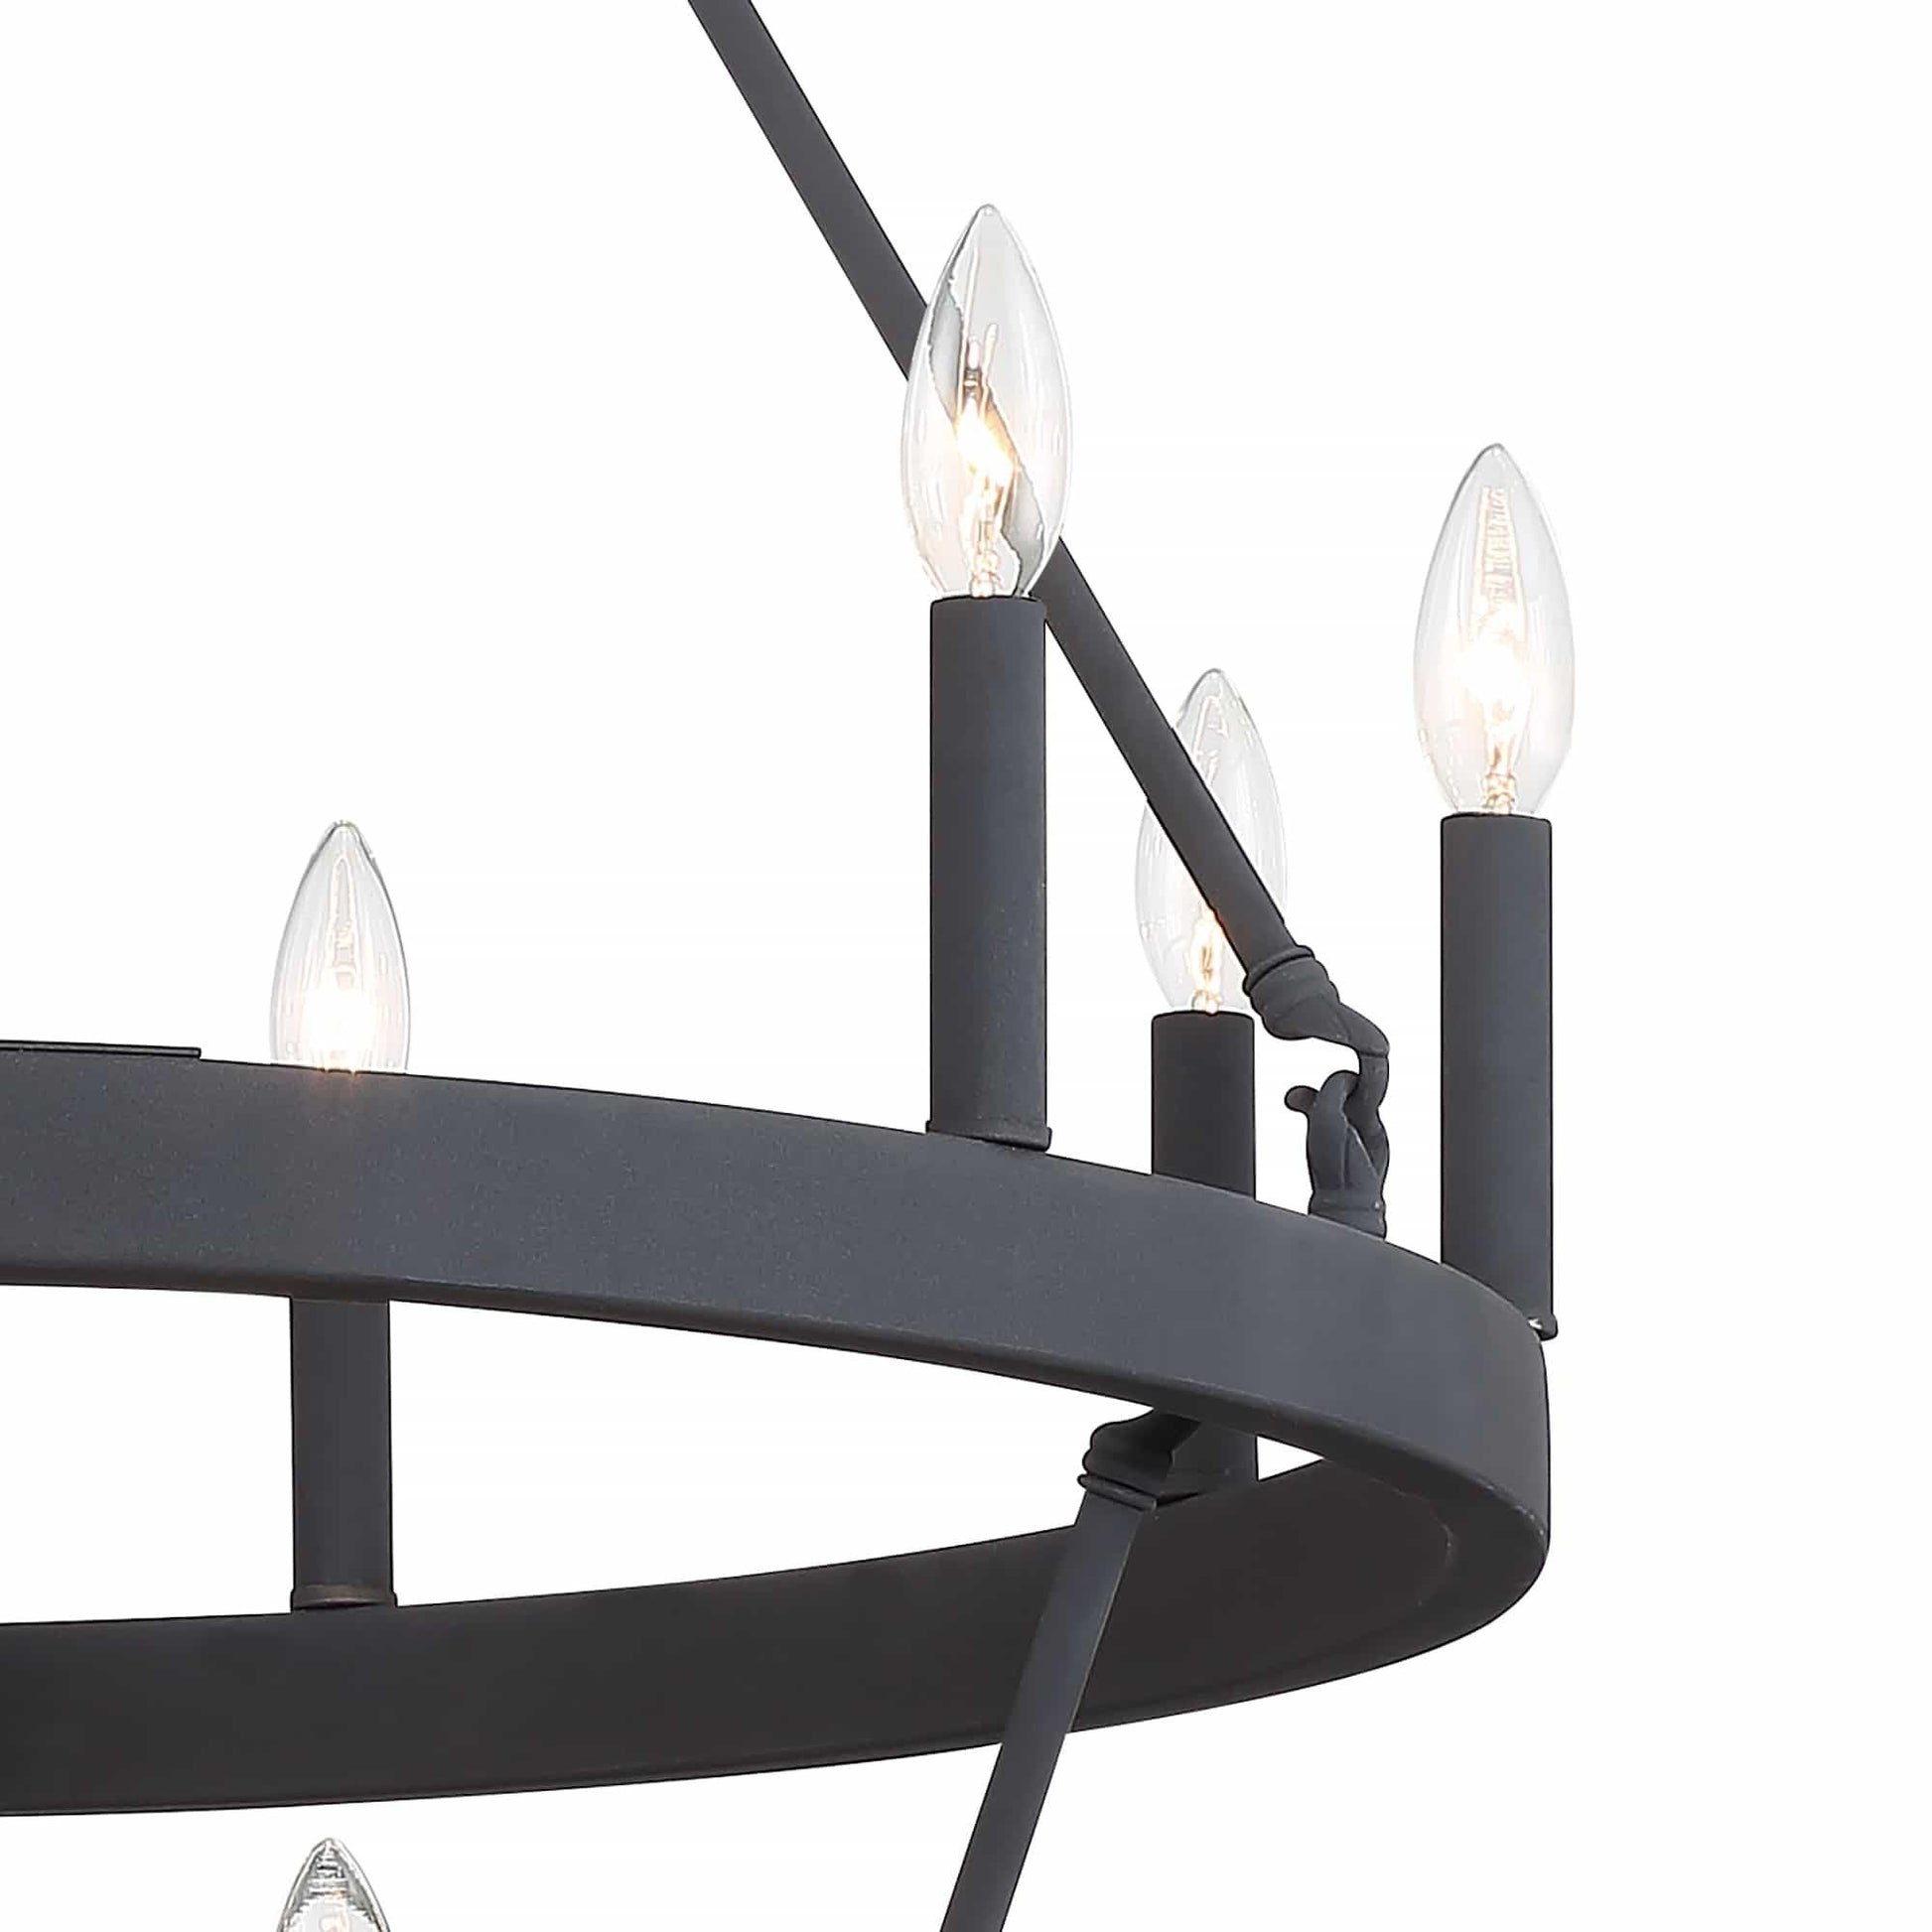 15 light candle style wagon wheel entry chandelier (9) by ACROMA